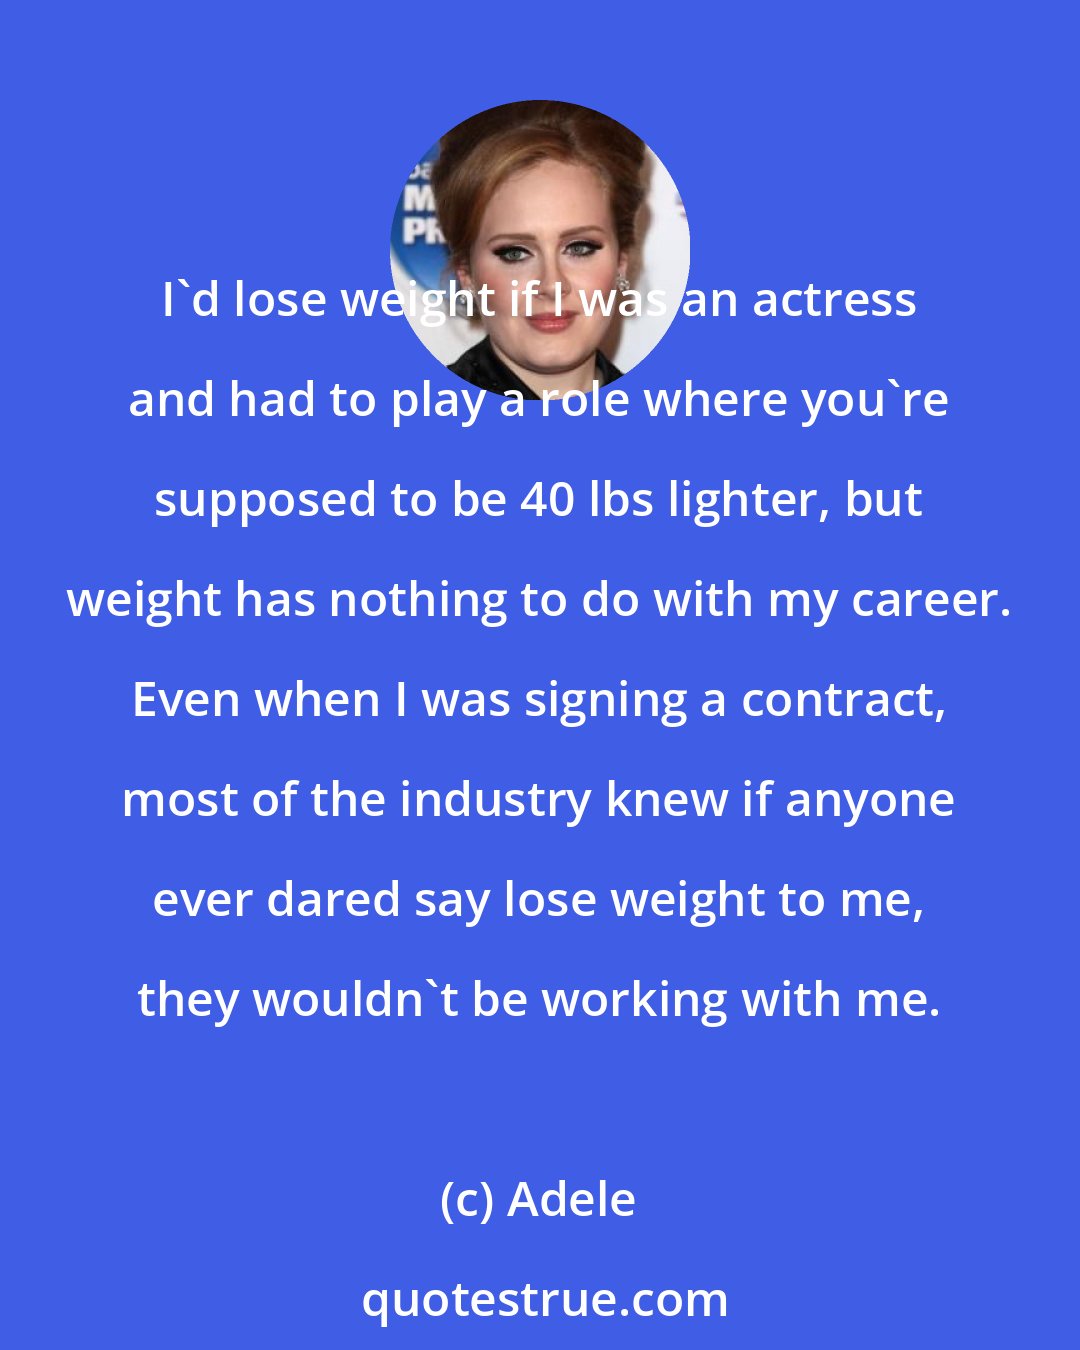 Adele: I'd lose weight if I was an actress and had to play a role where you're supposed to be 40 lbs lighter, but weight has nothing to do with my career. Even when I was signing a contract, most of the industry knew if anyone ever dared say lose weight to me, they wouldn't be working with me.